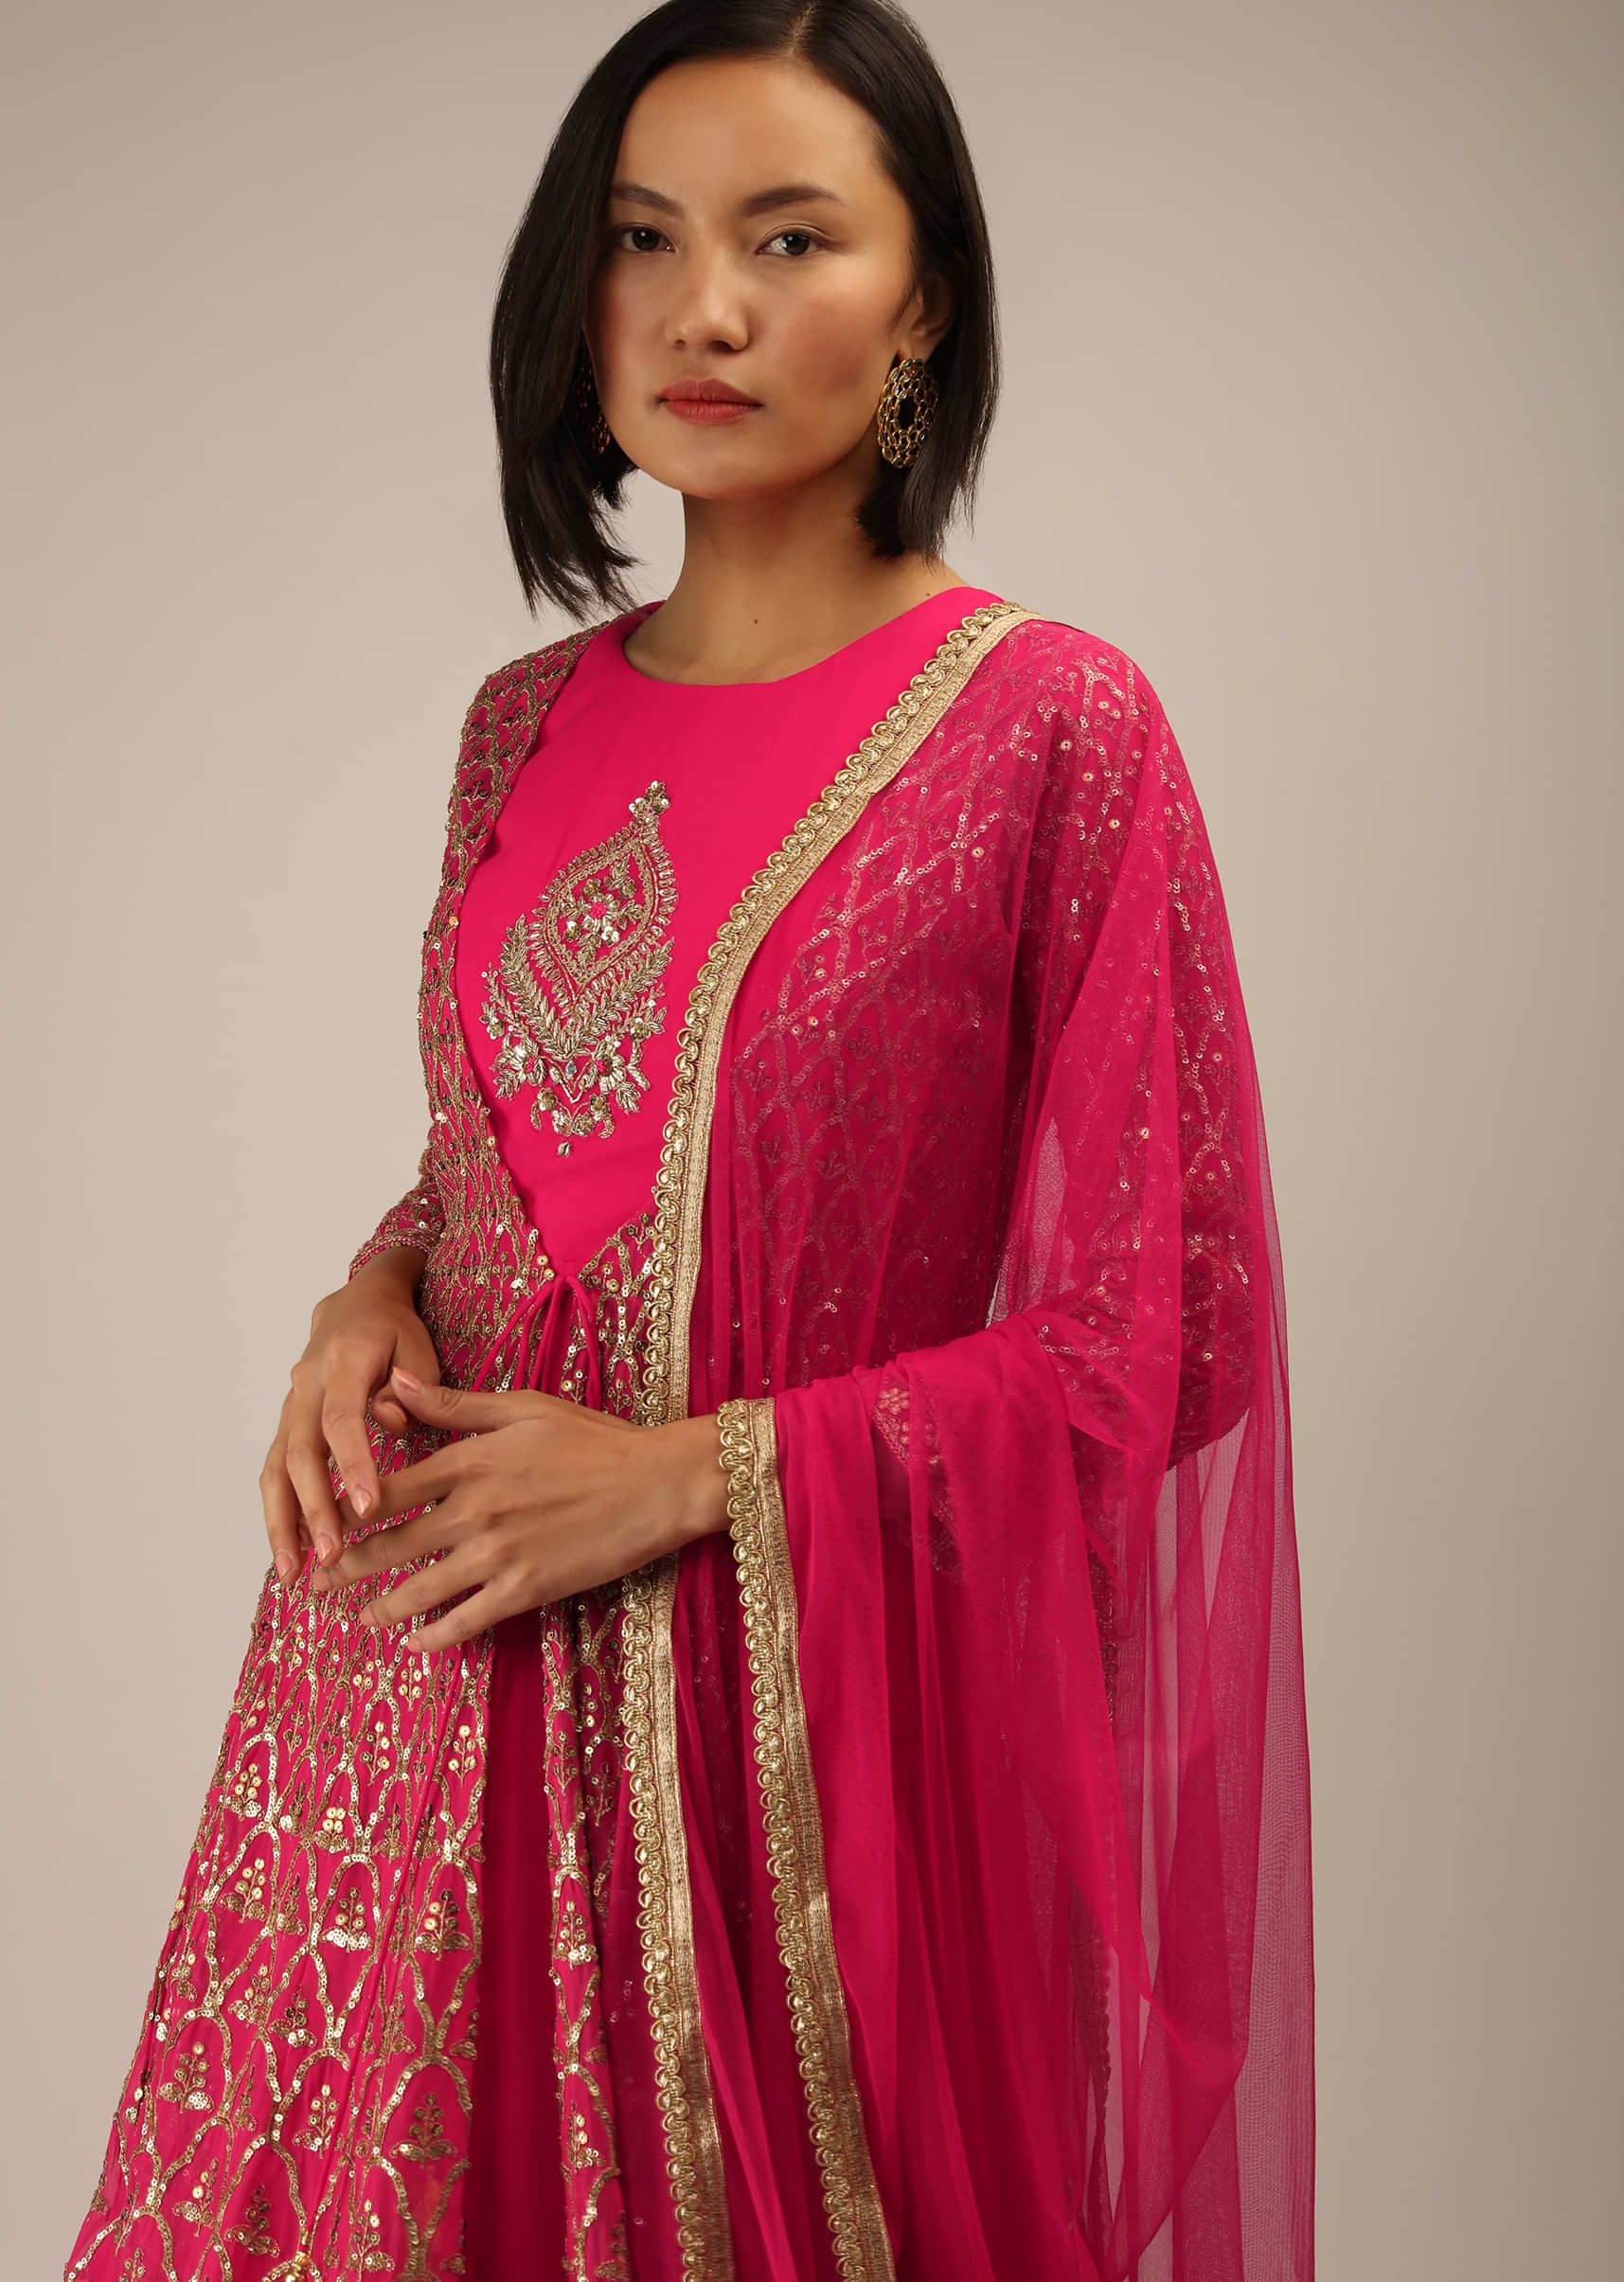 Hot Pink Floor Length Jacket Suit With Zari And Sequins Embroidered Moroccan Jaal